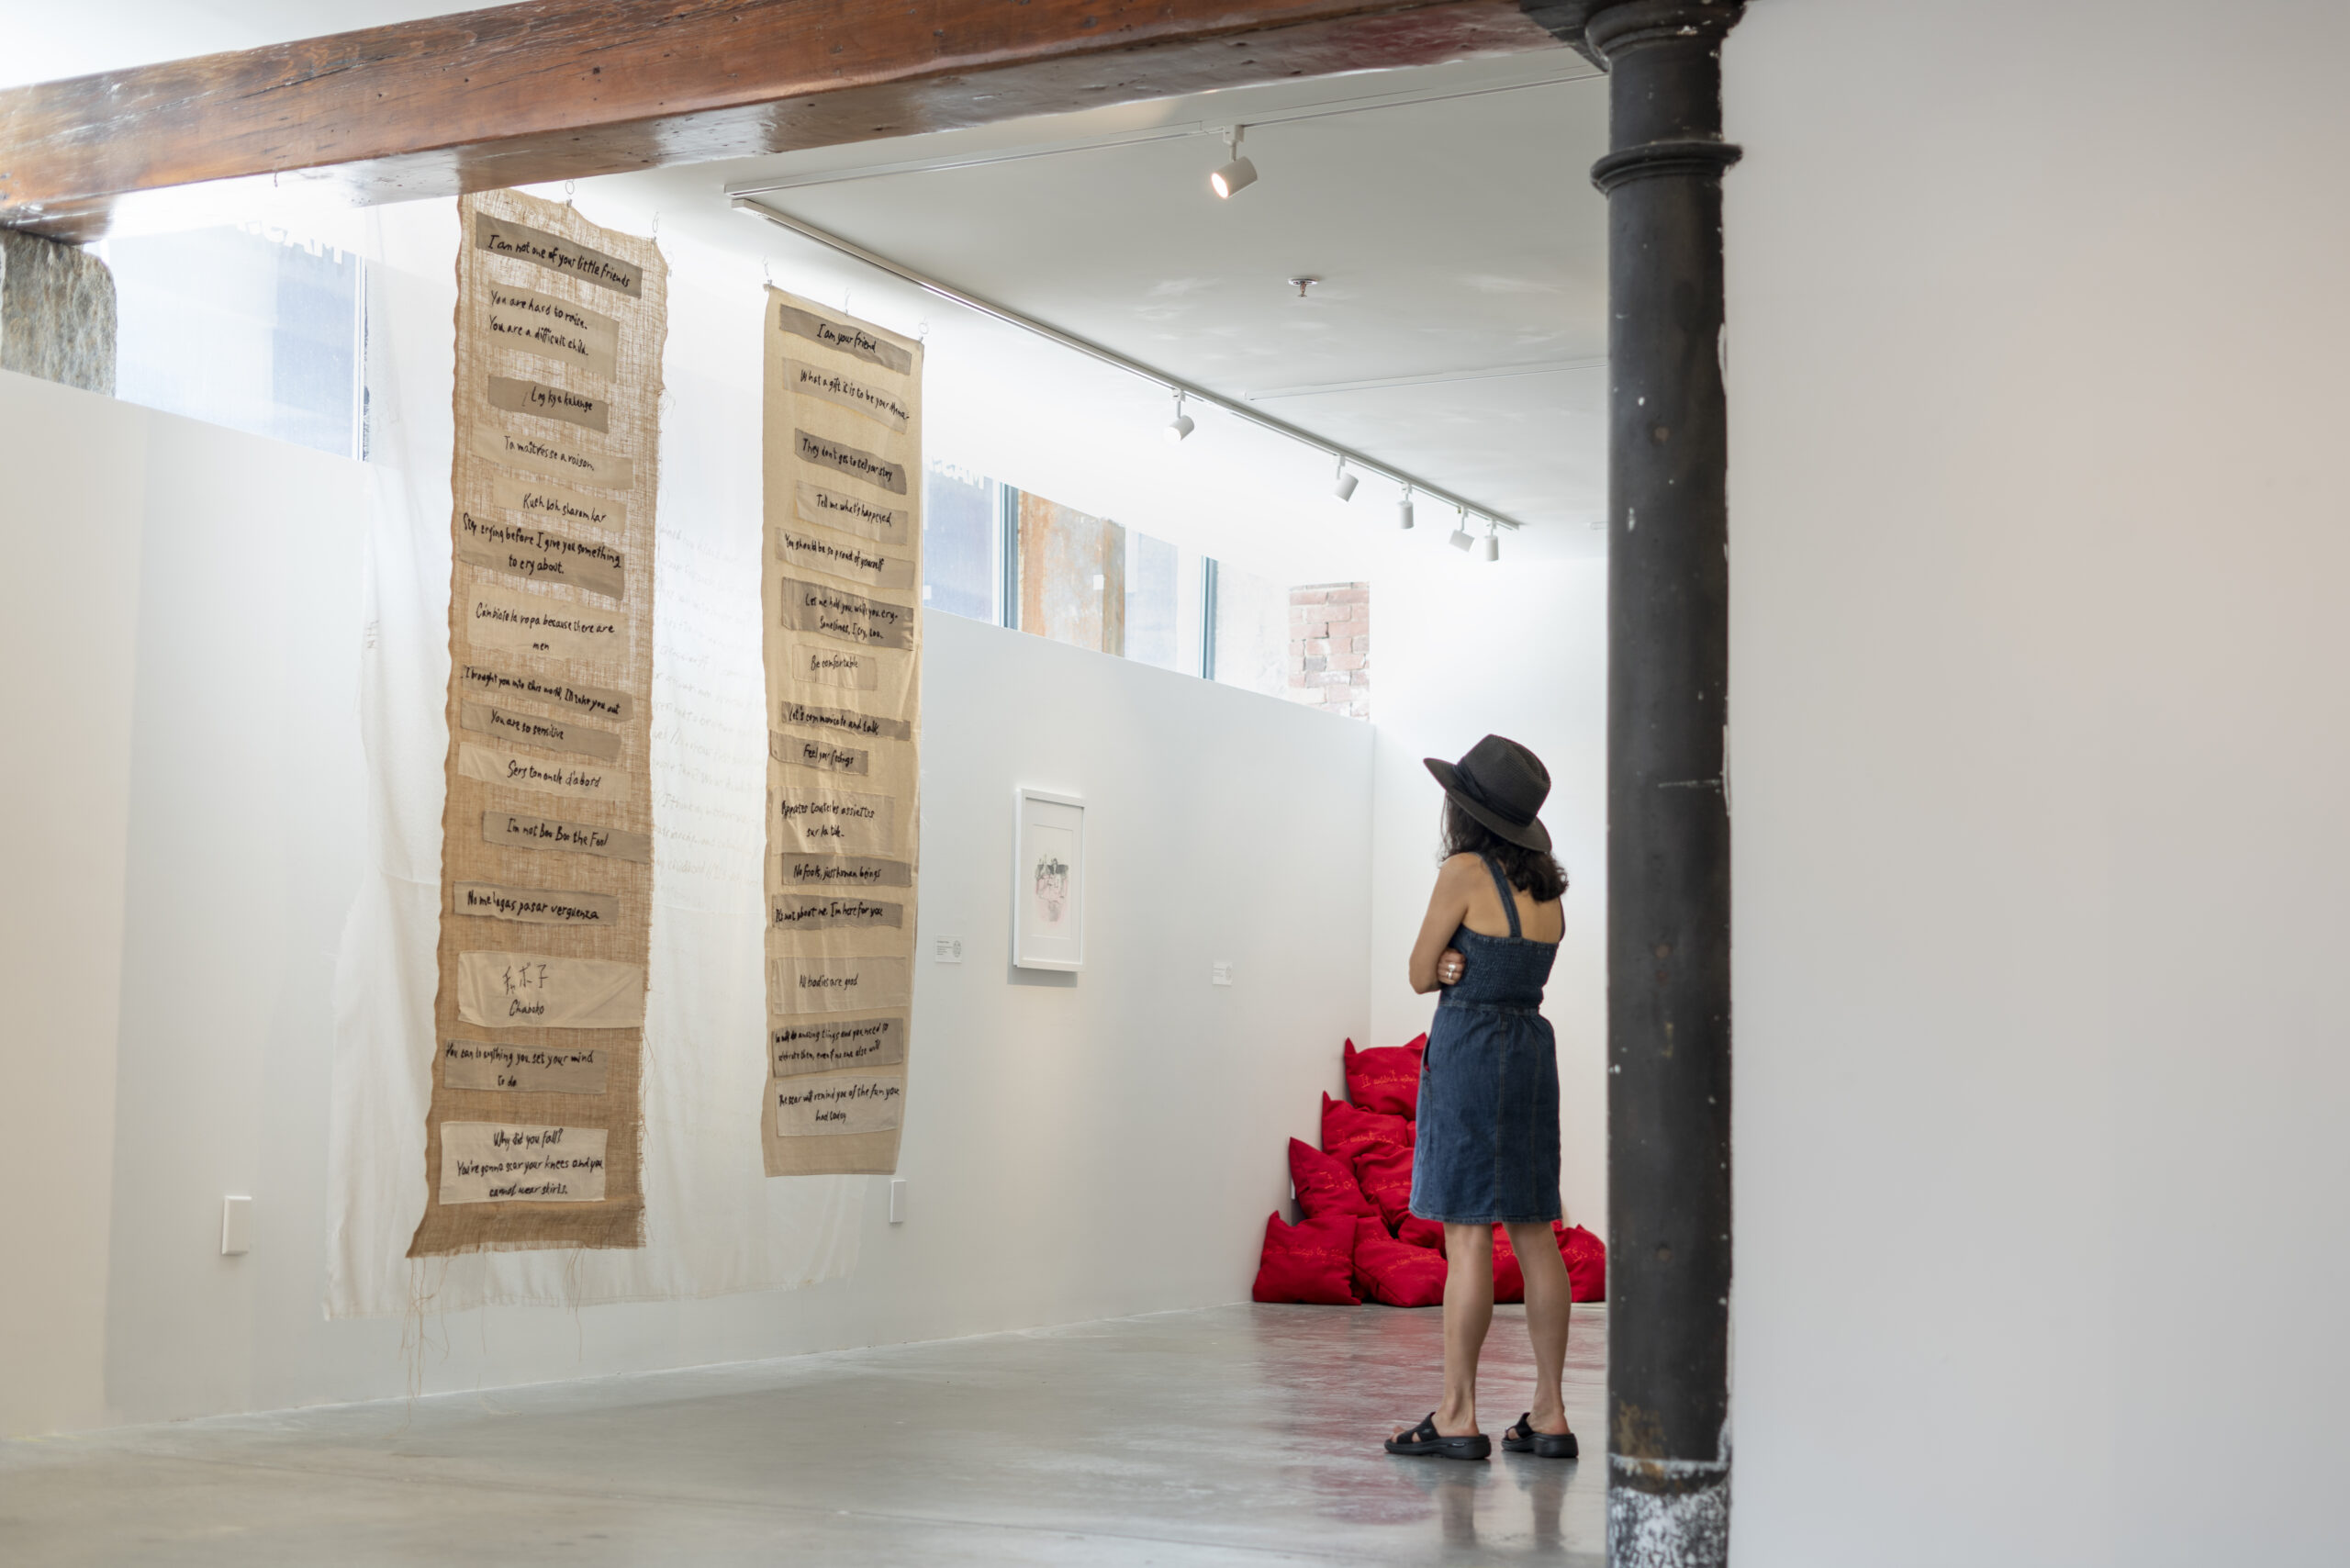 Matrescence at massArt x SoWa // Installation view featuring work from Amy Chan, Jasmien Chen, Tanya Nixon-Silberg and Catherine LeComte Lecce // Image courtesy curator Catherine LeComte Lecce